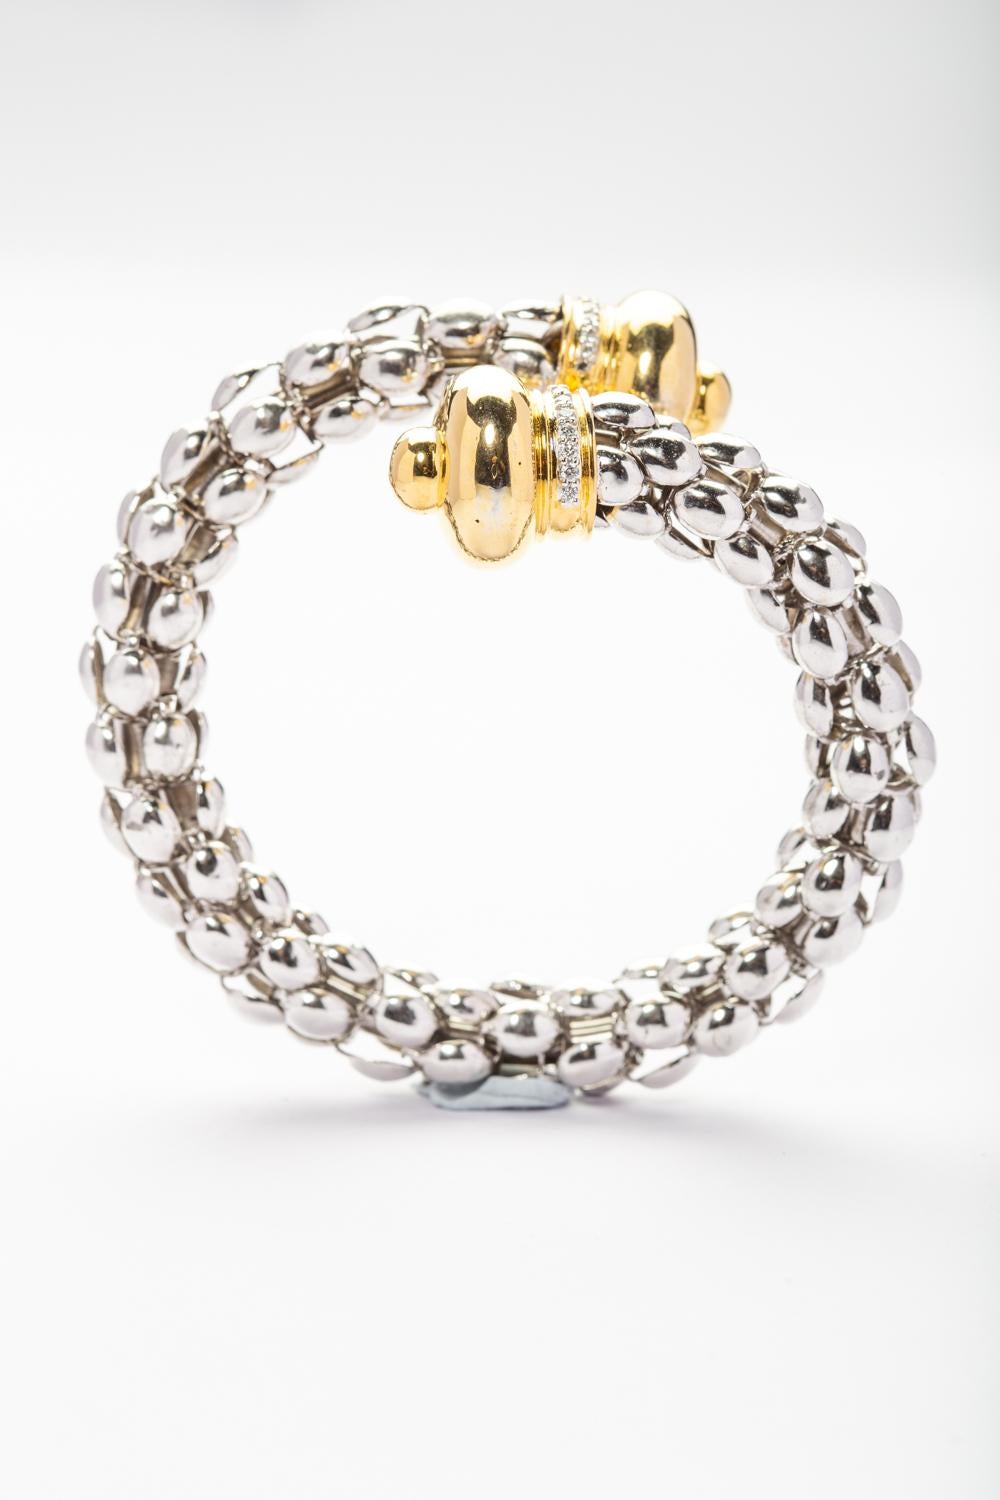 Contemporary Dome Wrap Bracelet in 18 Karat White and Yellow Gold Set with Diamonds For Sale